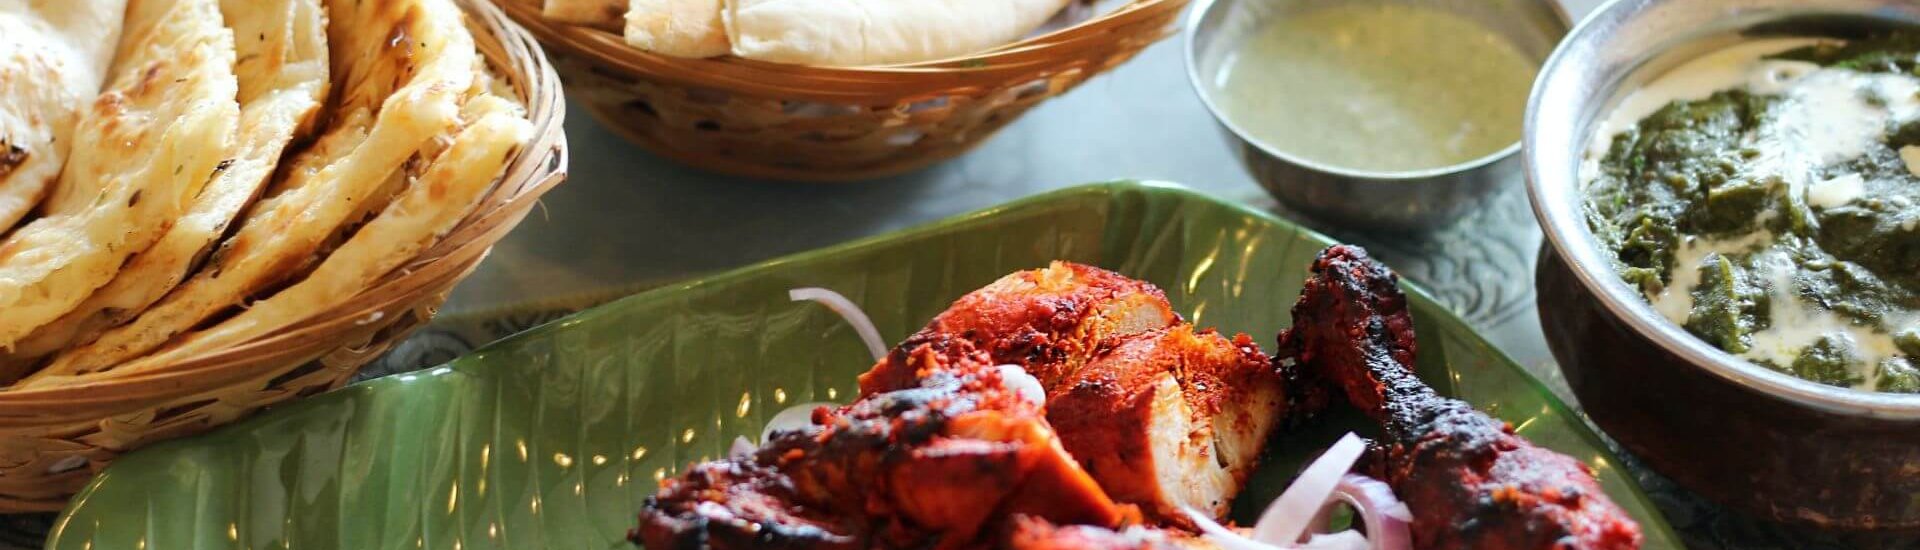 Tandoori chicken in a banana leaf bowl with two baskets of naan, a small metal bowl of green-coloured raita, and a bigger metal bowl of a white and green curry, served at an Indian Restaurant.